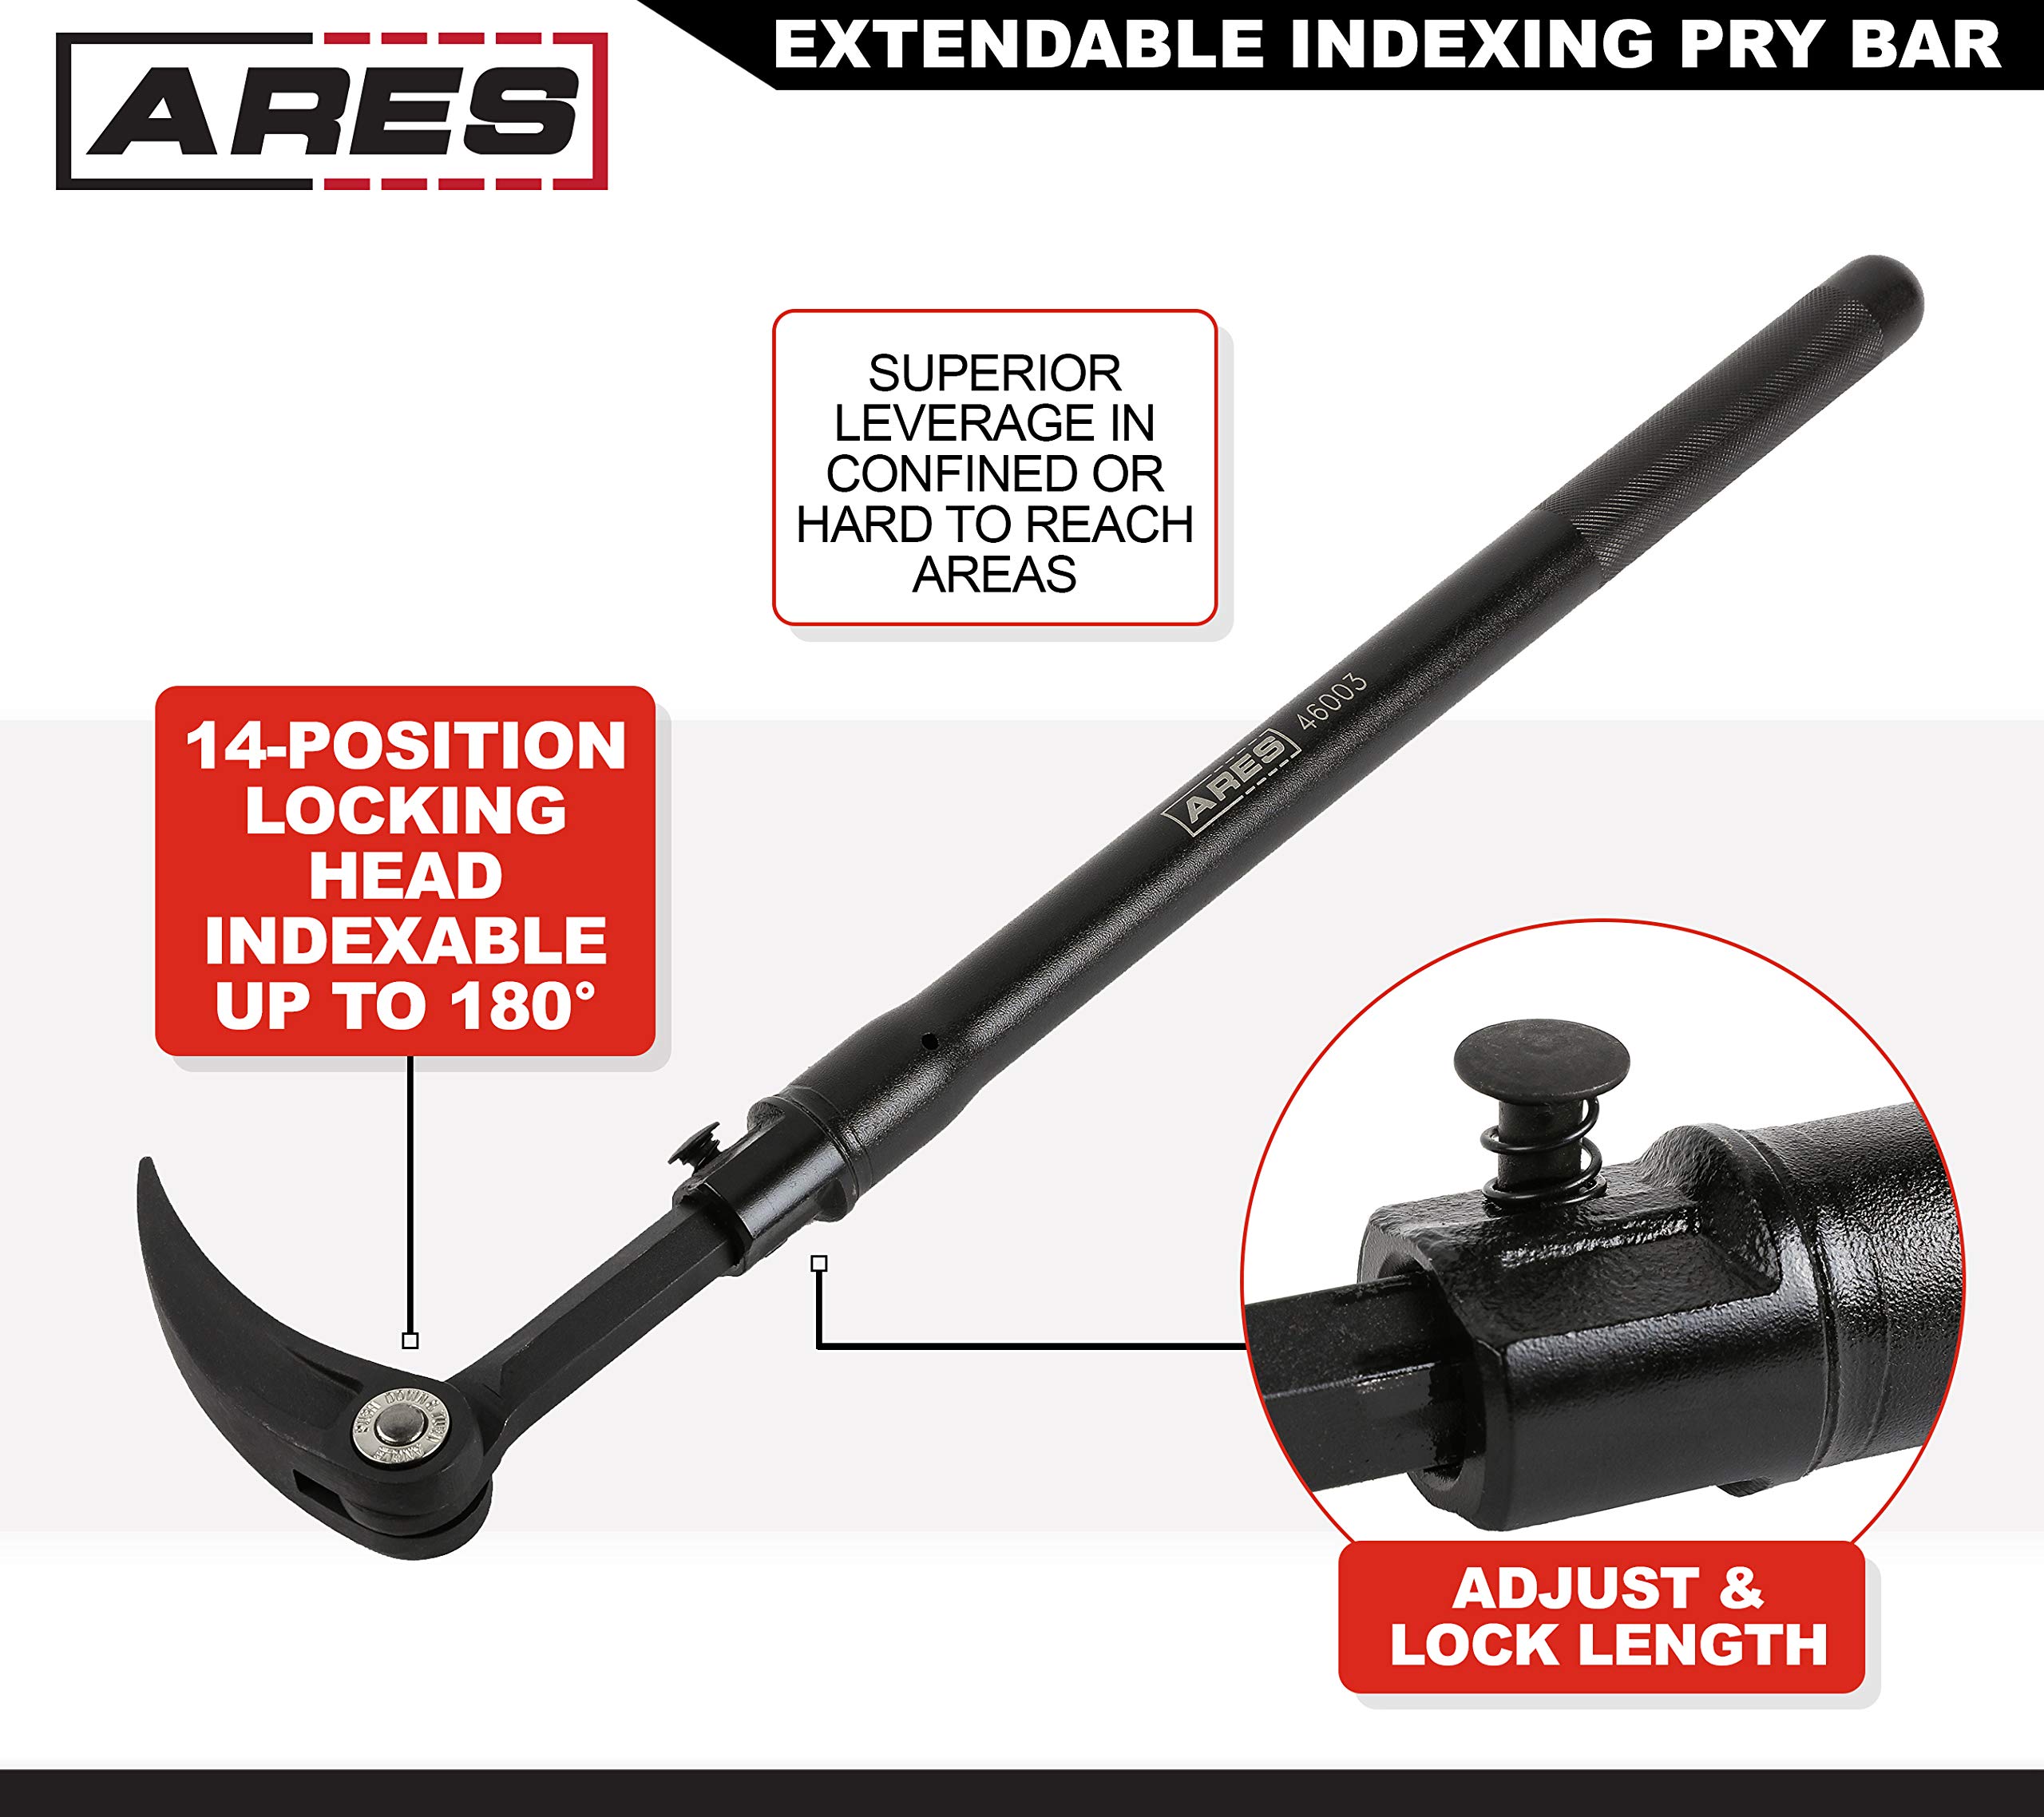 ARES 46003-21-Inch to 33-Inch Extendable Indexing Pry Bar - 14-Position Adjustable Angle Head - High Strength Chrome Vanadium Steel